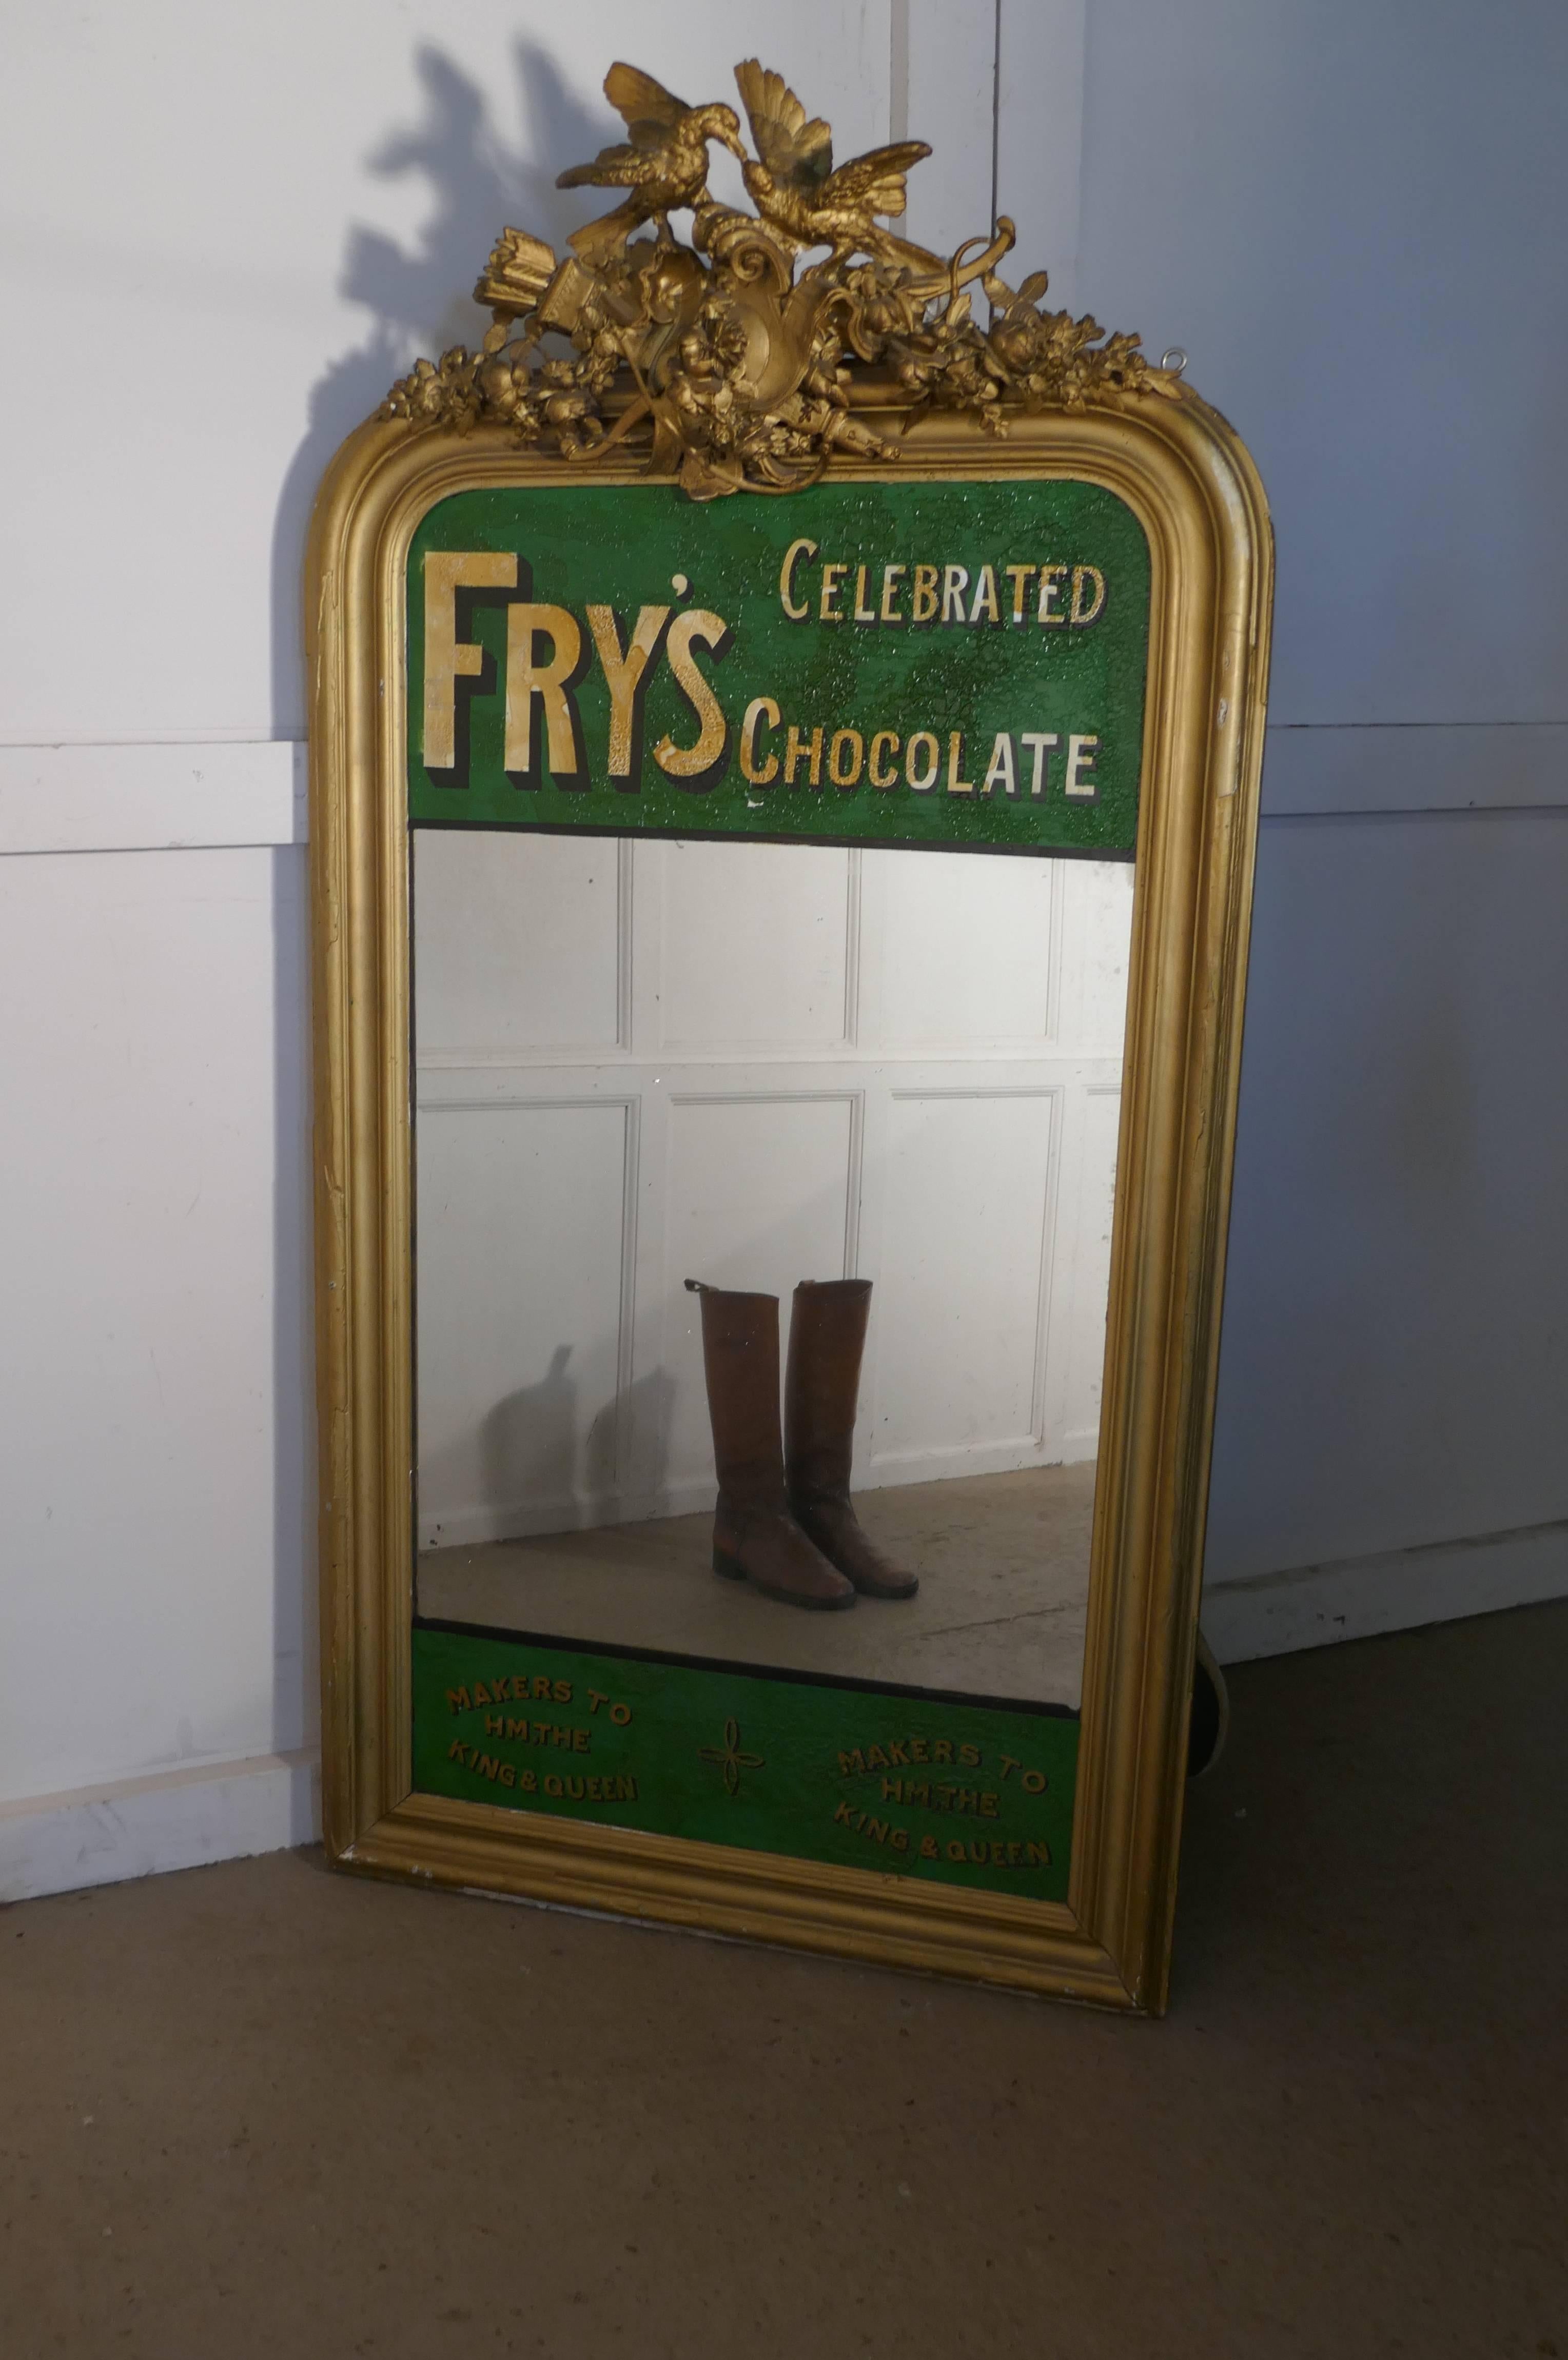 Large Victorian advertising mirror, Fry’s Chocolate overmantel

This is a superb quality and very large Victorian wall mirror or overmantel, it has the early Green and Gold colours associated with Fry’s Celebrated Chocolate advertising banner at